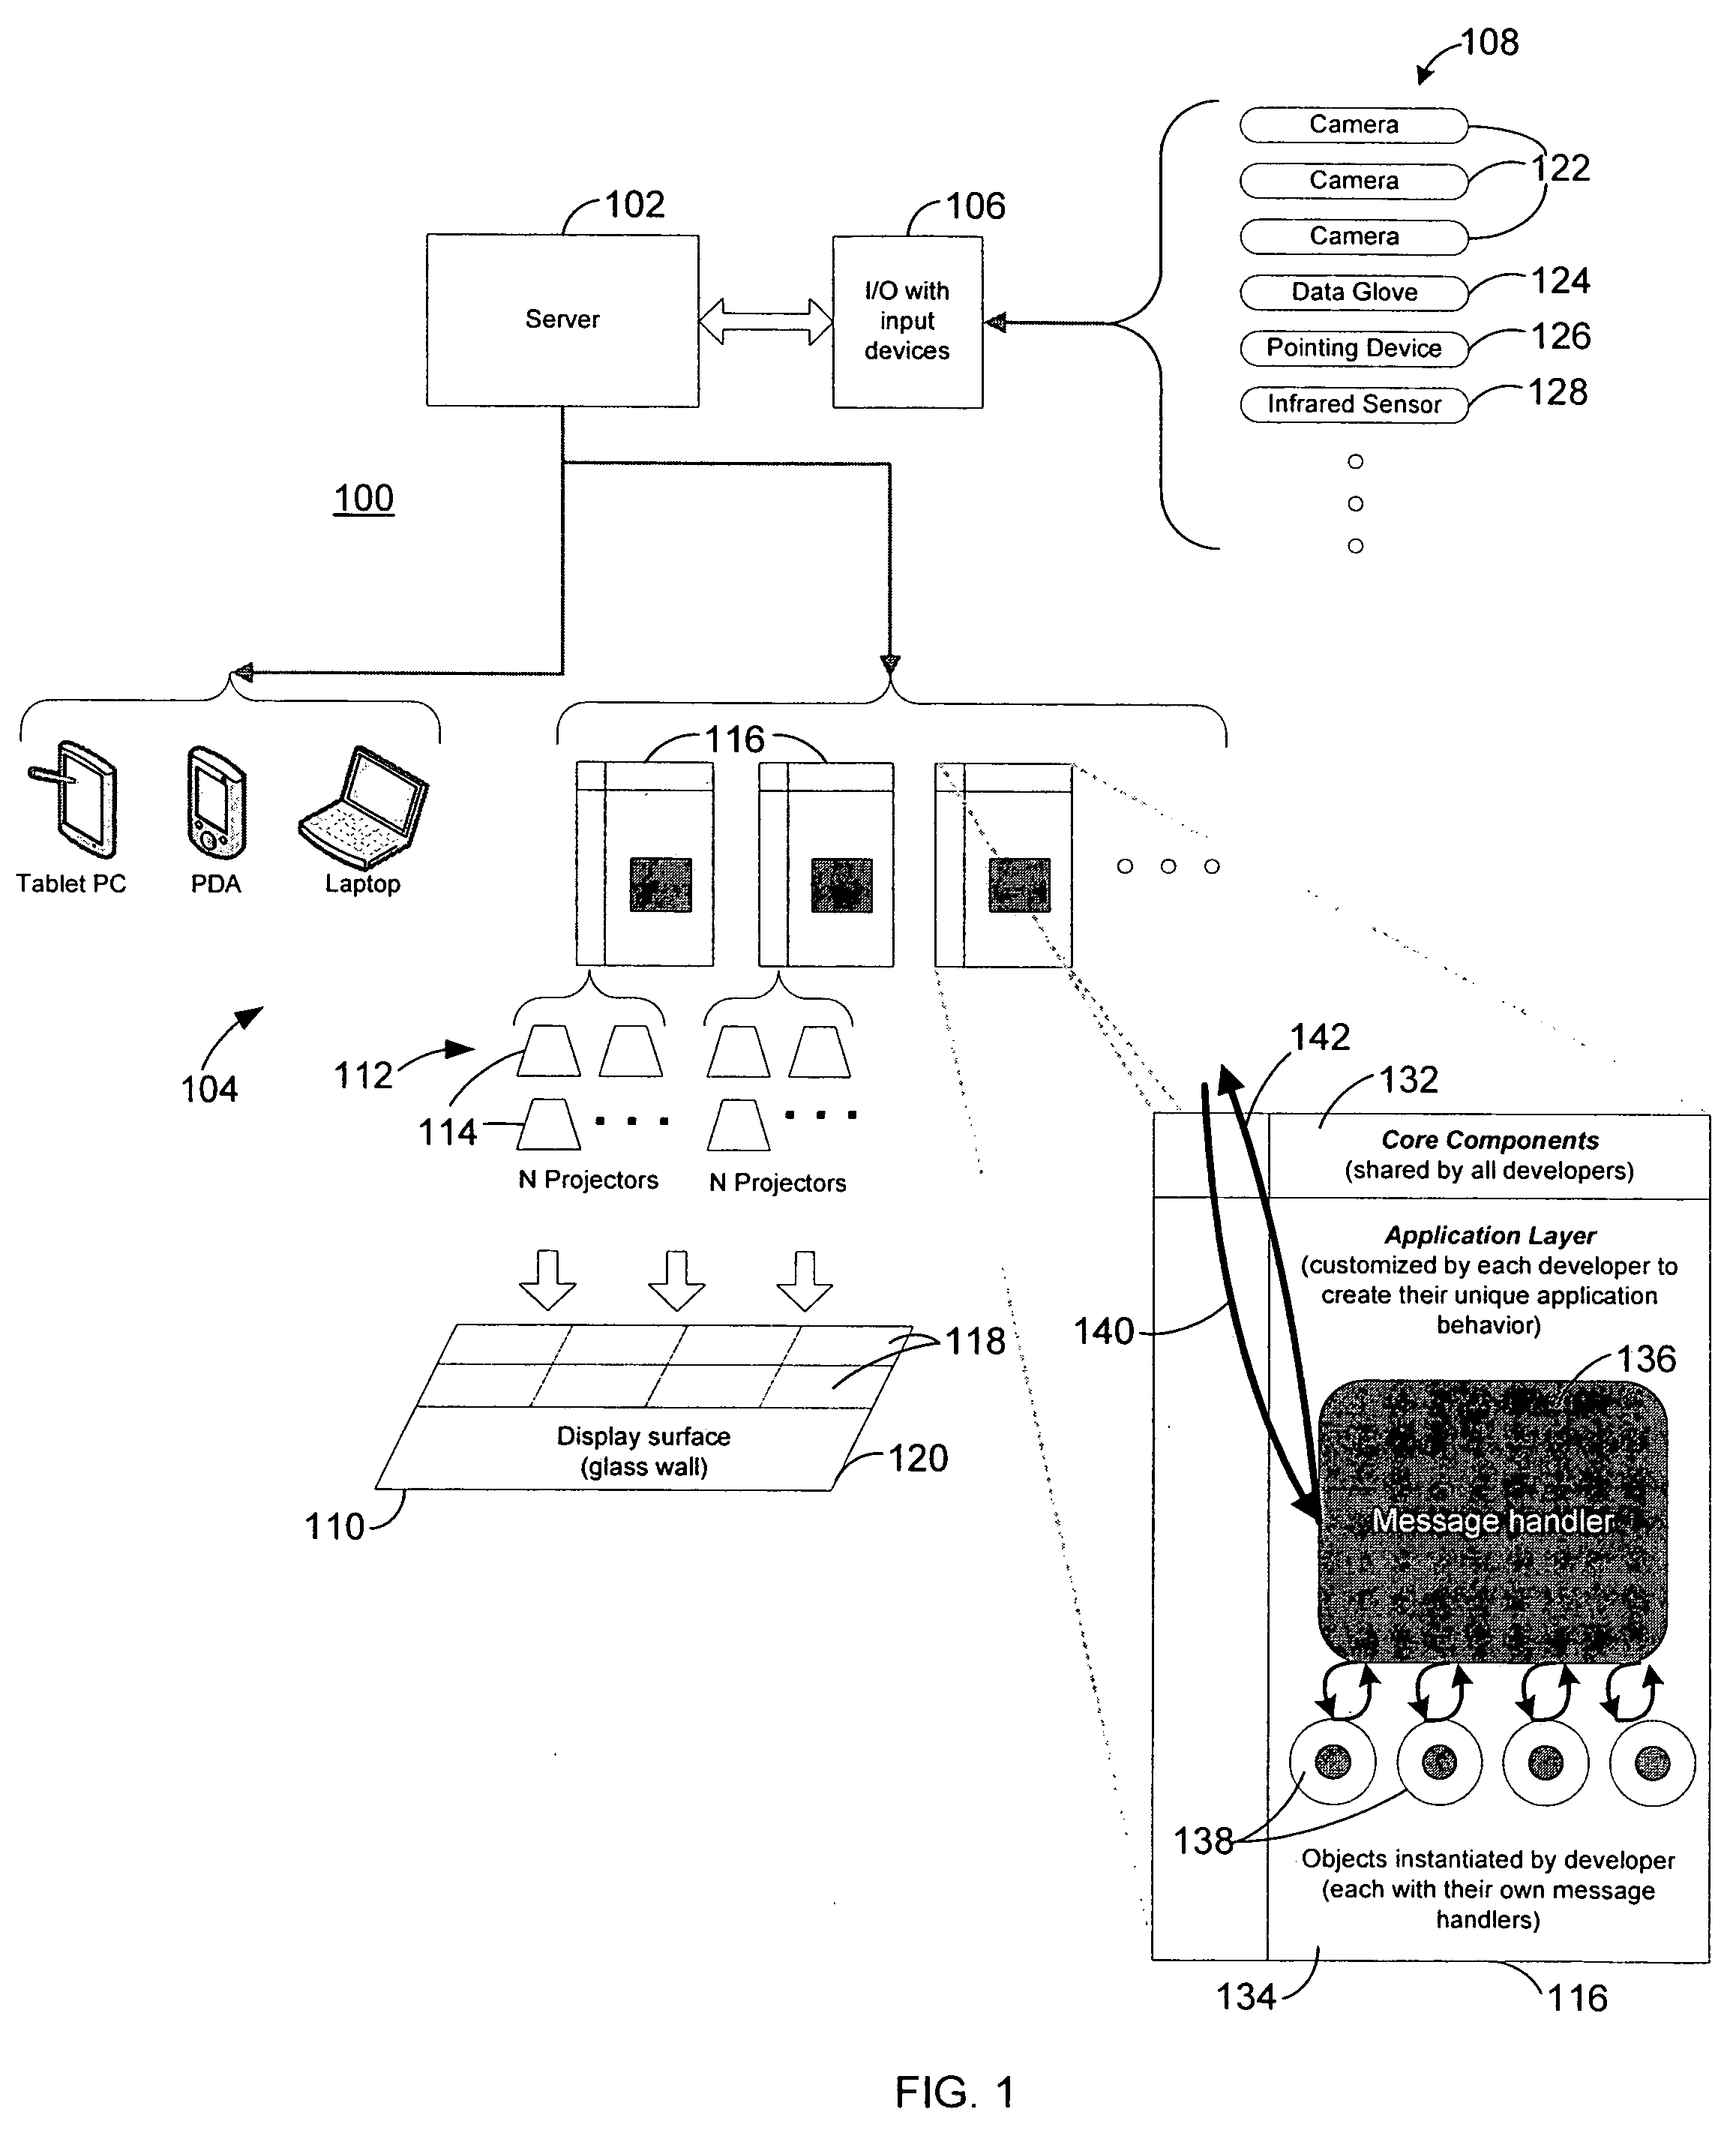 System for distributed information presentation and interaction